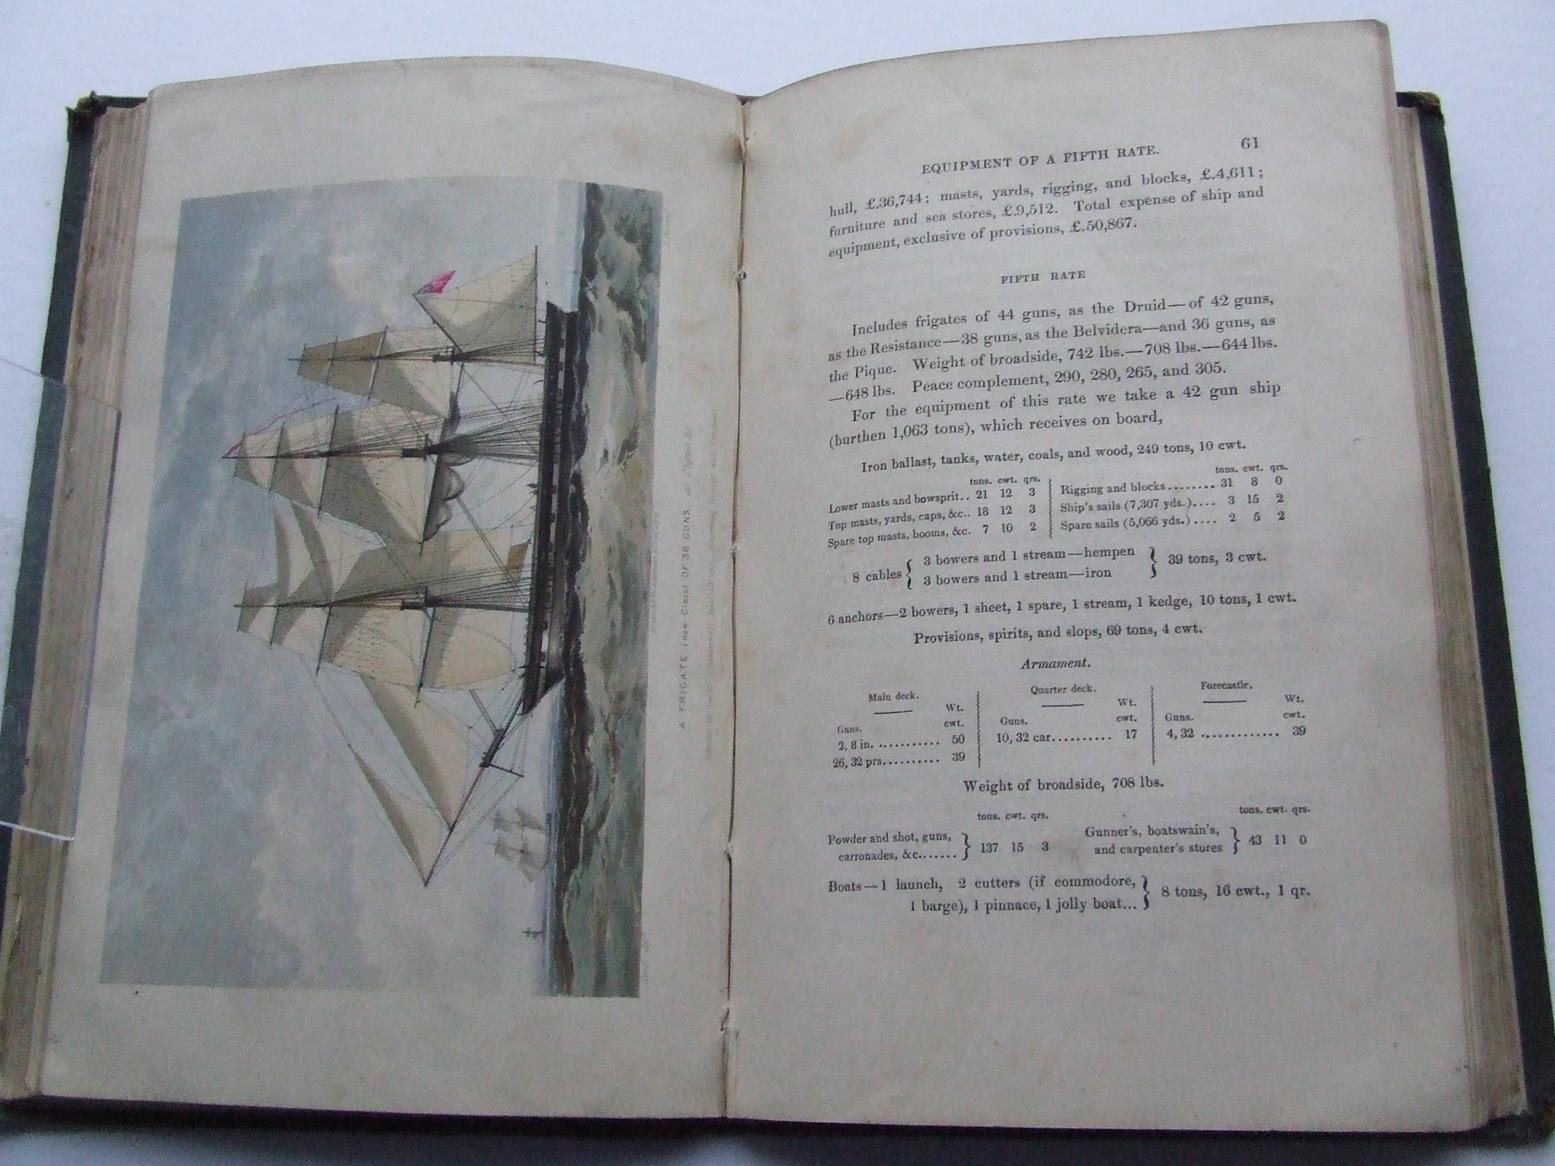 An Epitome, Historical and Statistical, Descriptive of the Royal Naval Service of England